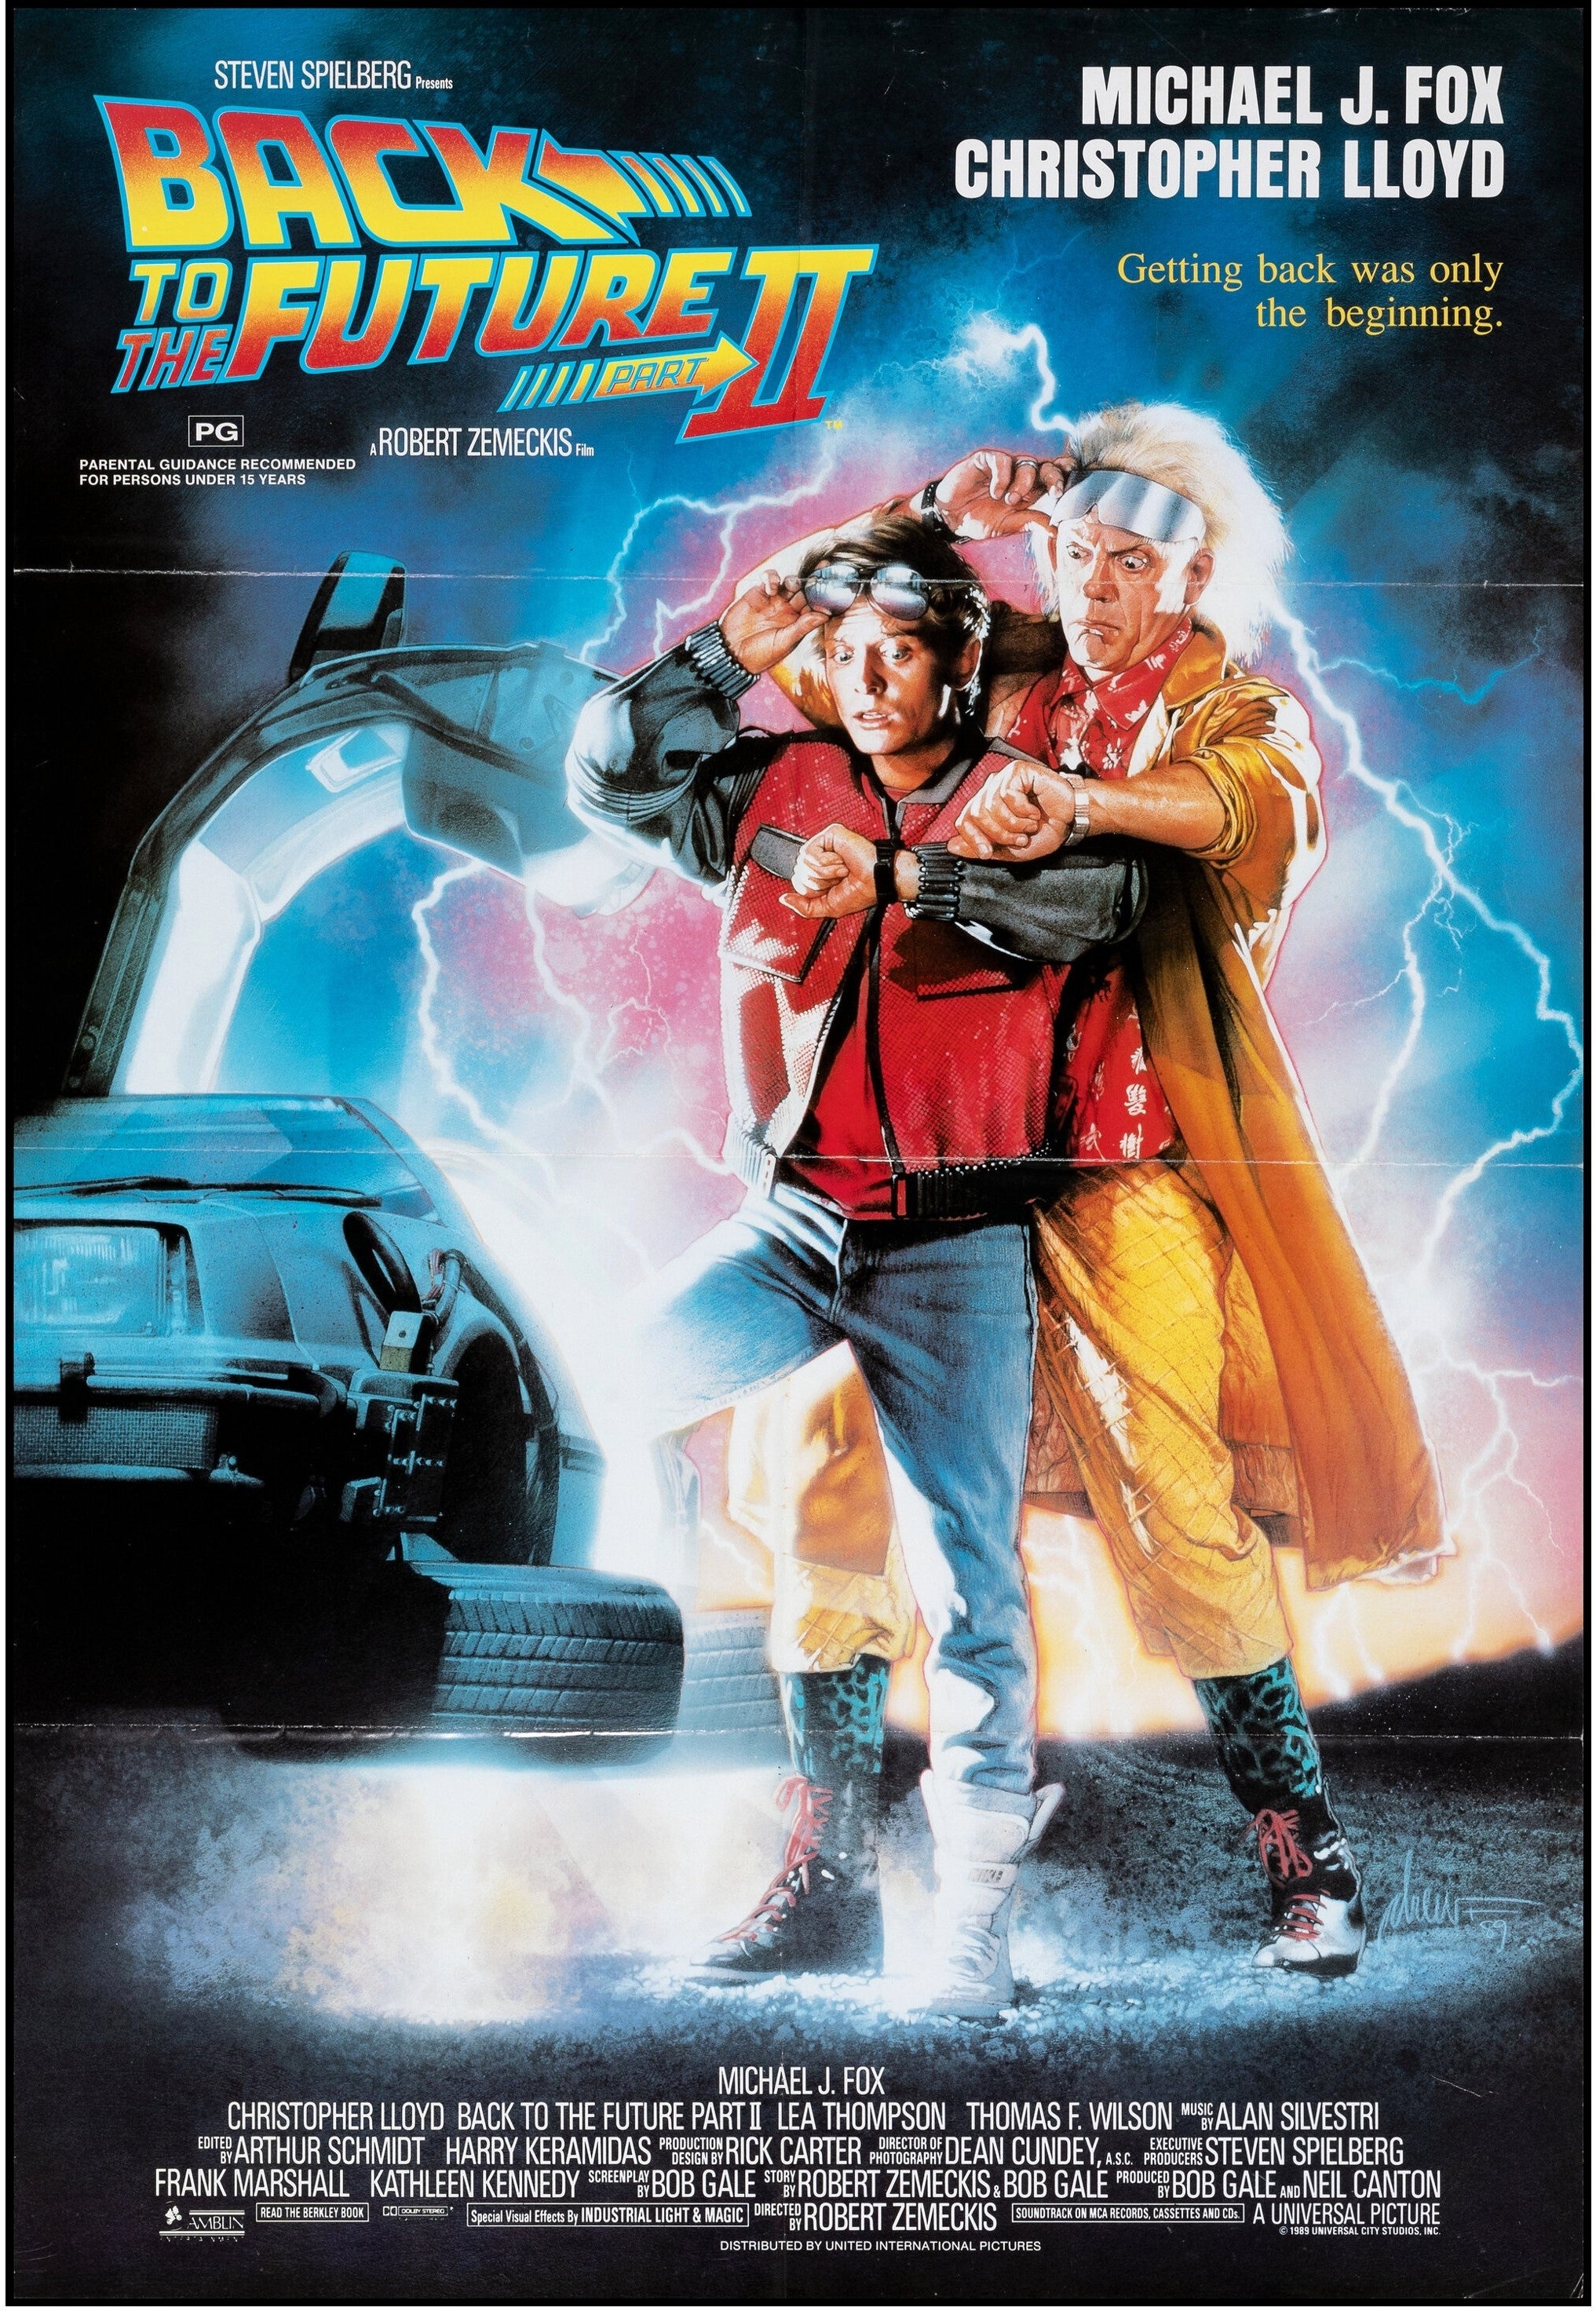 BACK TO THE FUTURE PART 2 (1989)